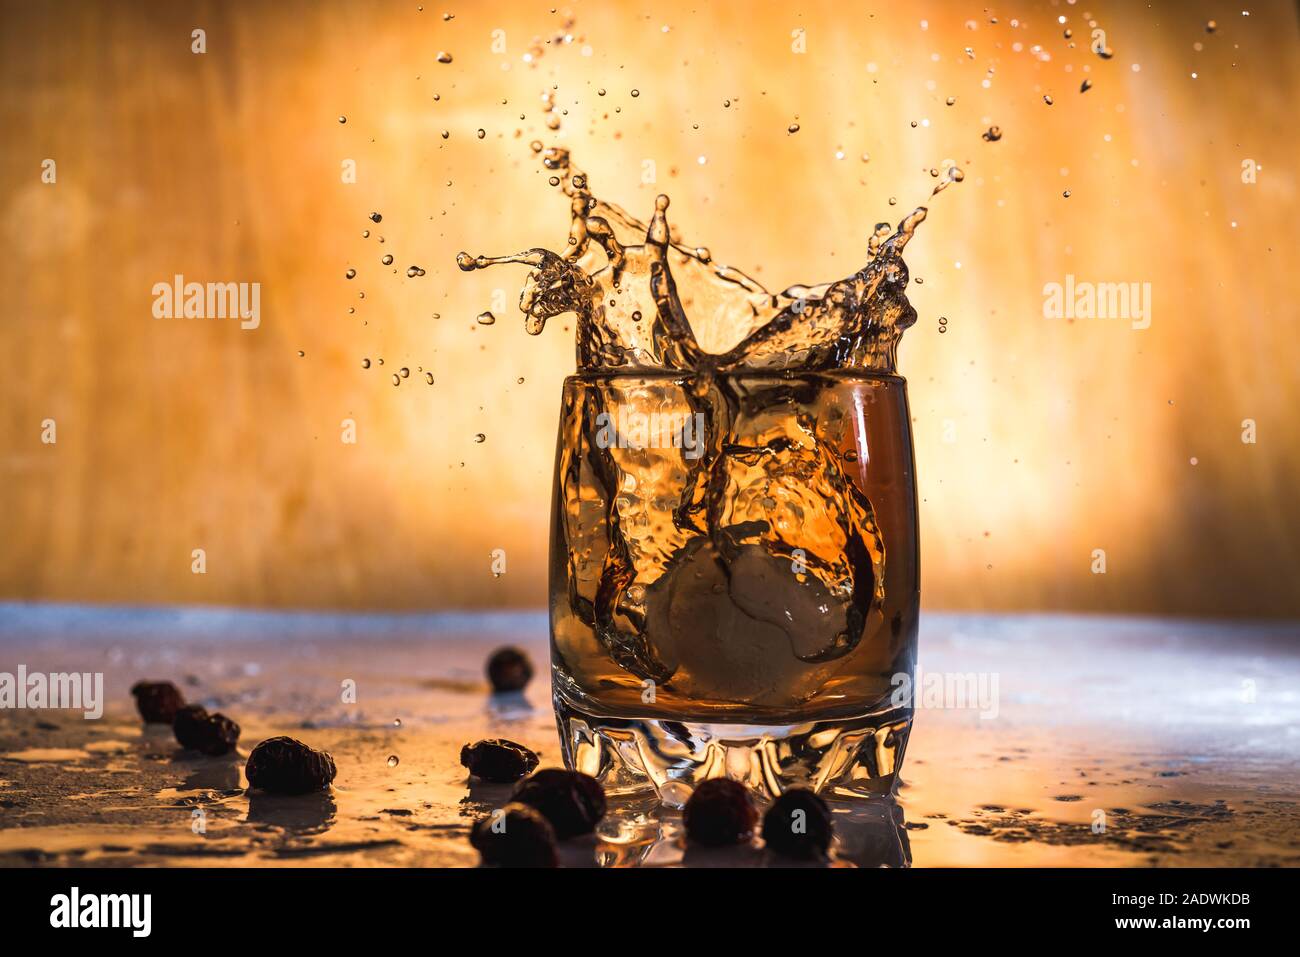 https://c8.alamy.com/comp/2ADWKDB/splash-of-cold-ice-in-glass-of-whiskey-isolated-on-a-light-background-2ADWKDB.jpg